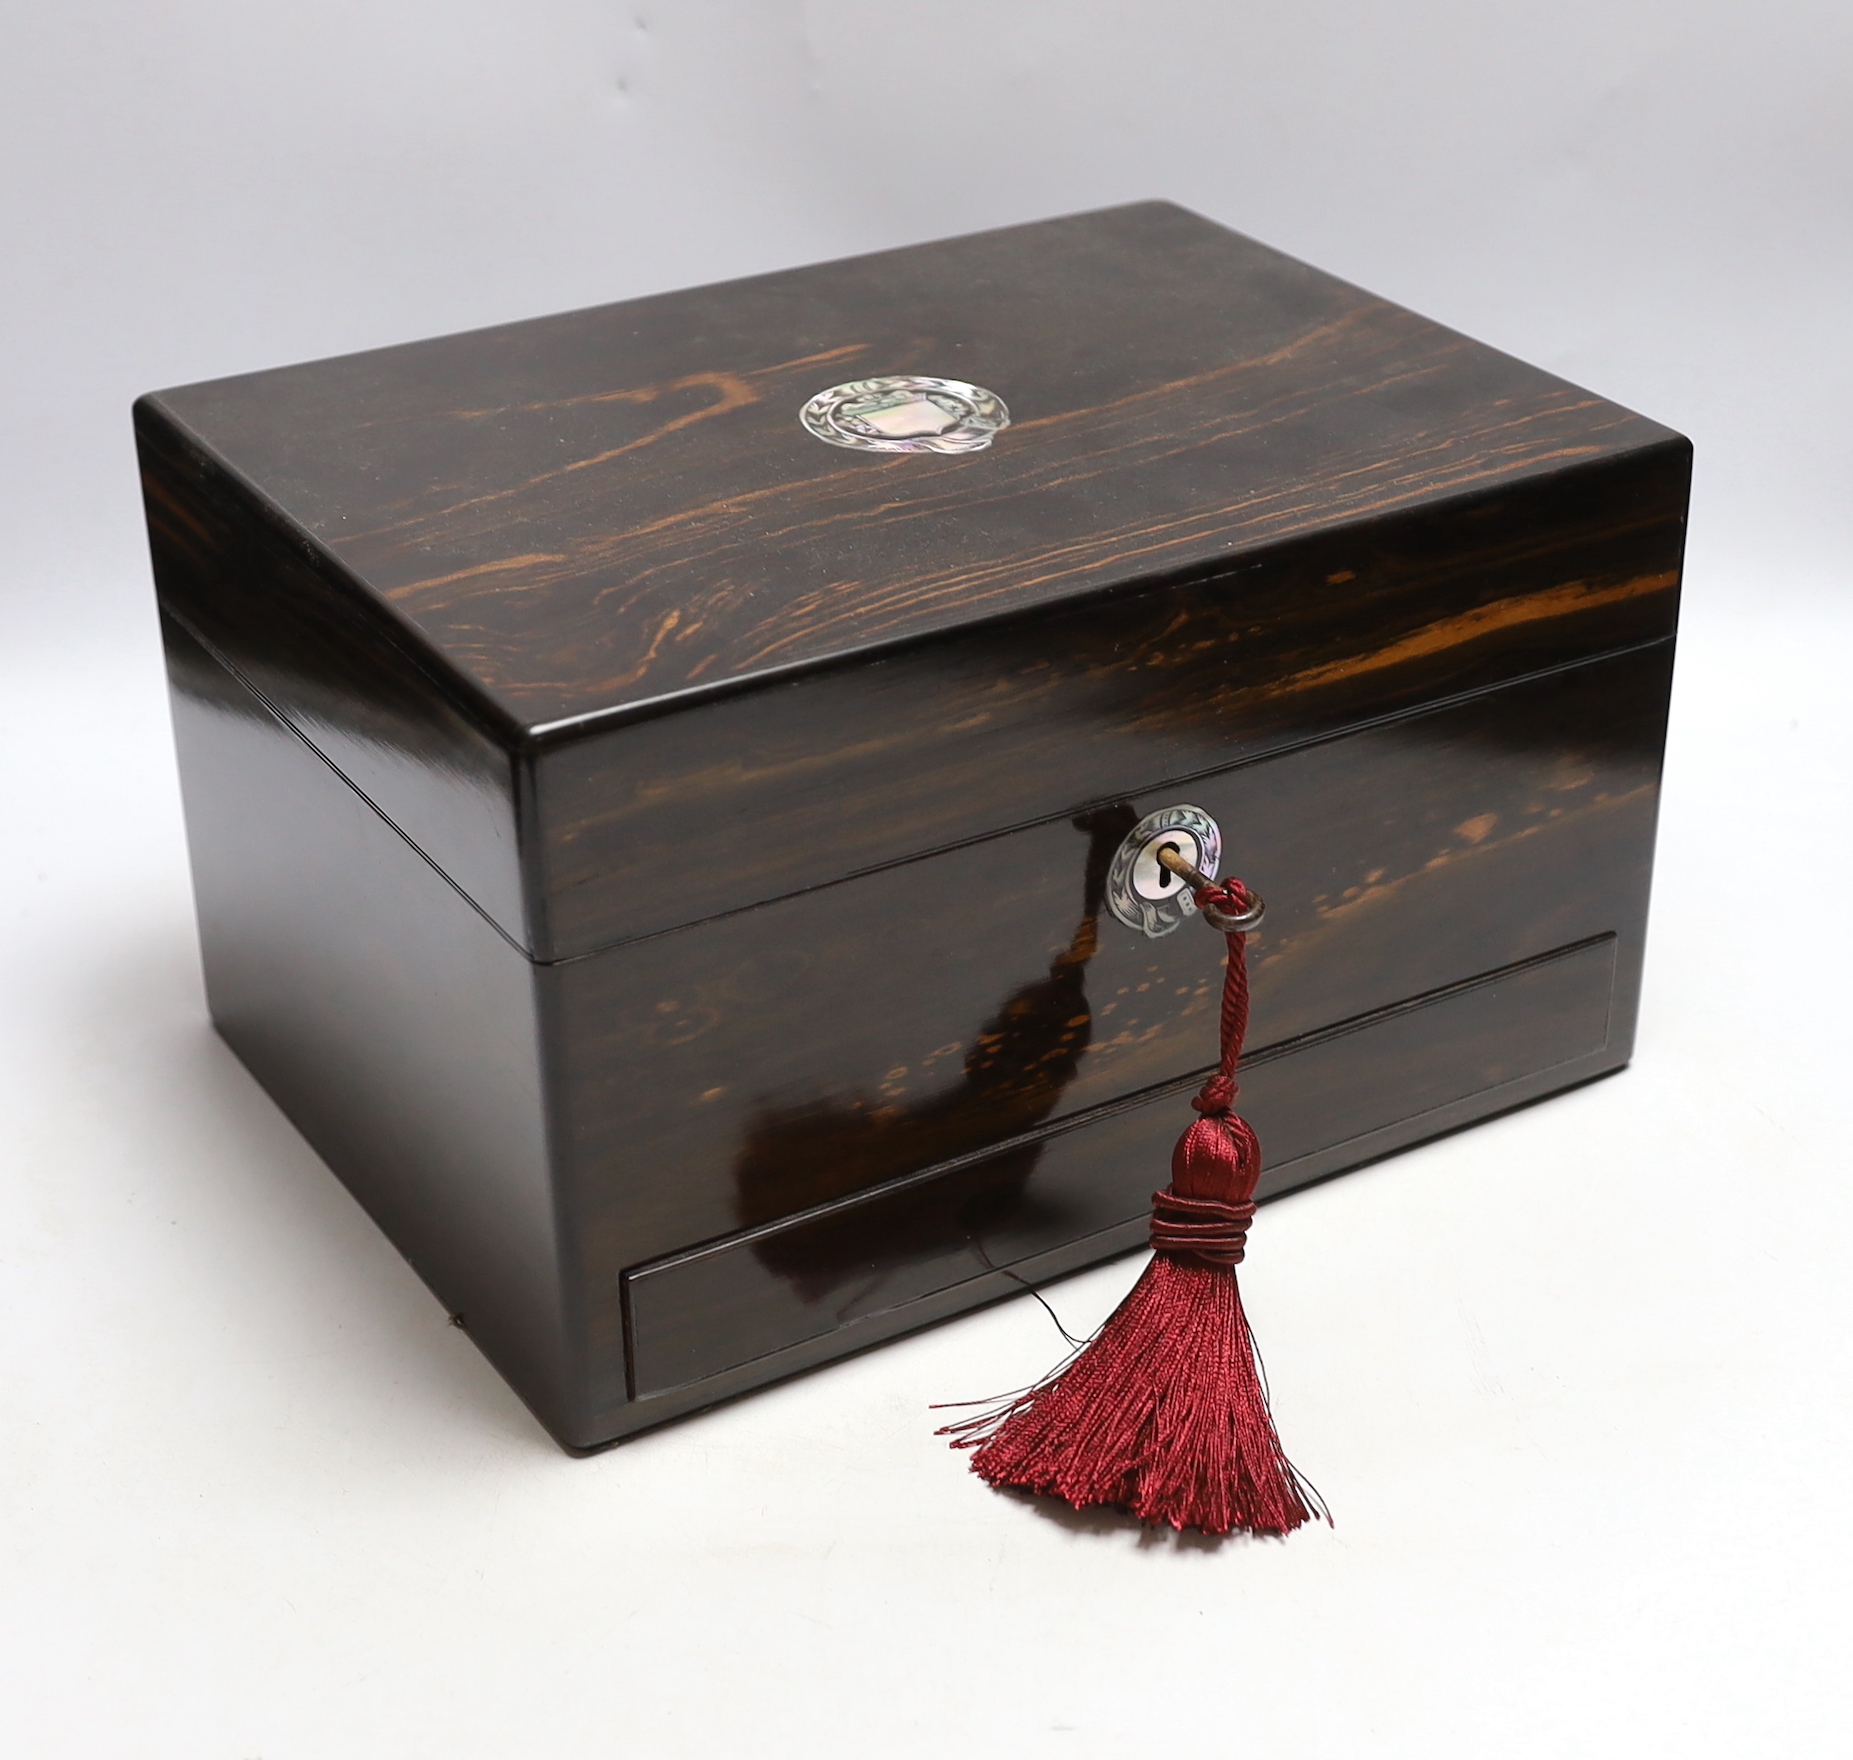 A Victorian coromandel wood toilet box with plated fittings and Mother of Pearl inlay to lid, fitted internal compartments containing glass bottles with plated lids and other accessories, and jewellery drawer underneath